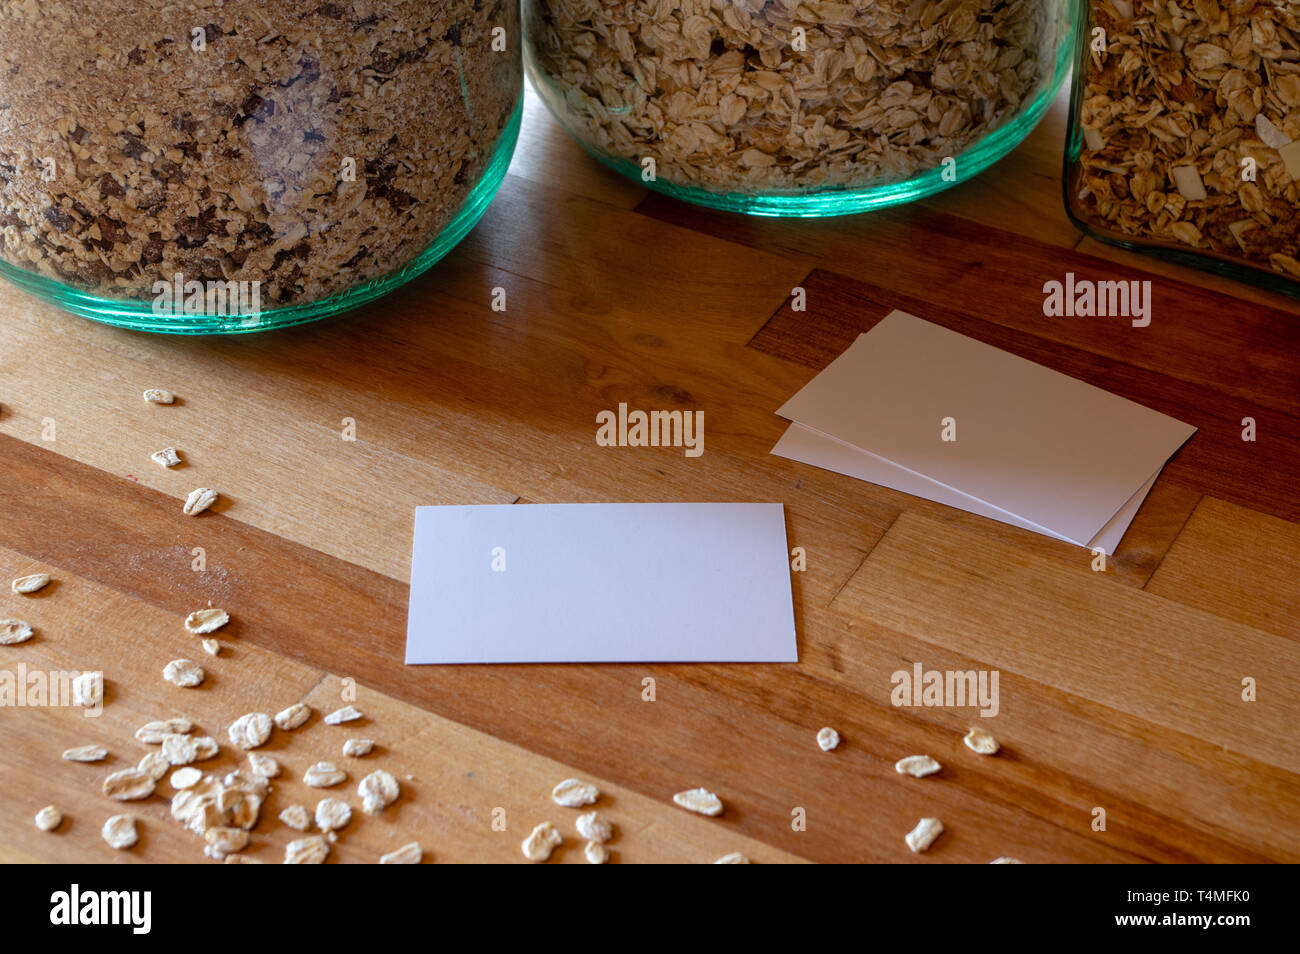 business card mockup templates on a table with sprinkled oatmeal - muesli jars in background Stock Photo